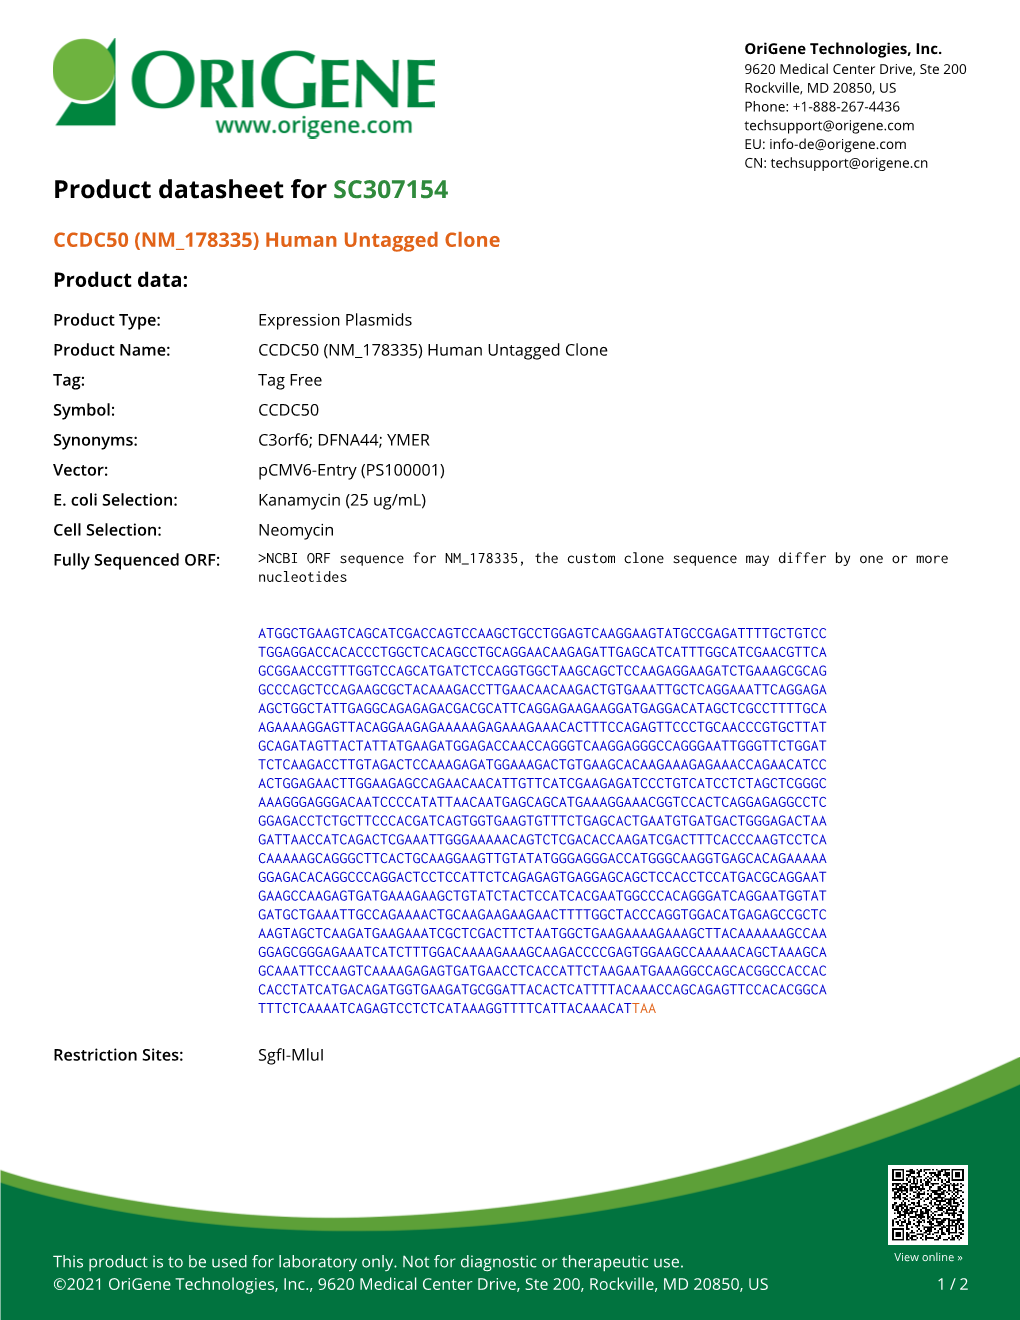 CCDC50 (NM 178335) Human Untagged Clone Product Data